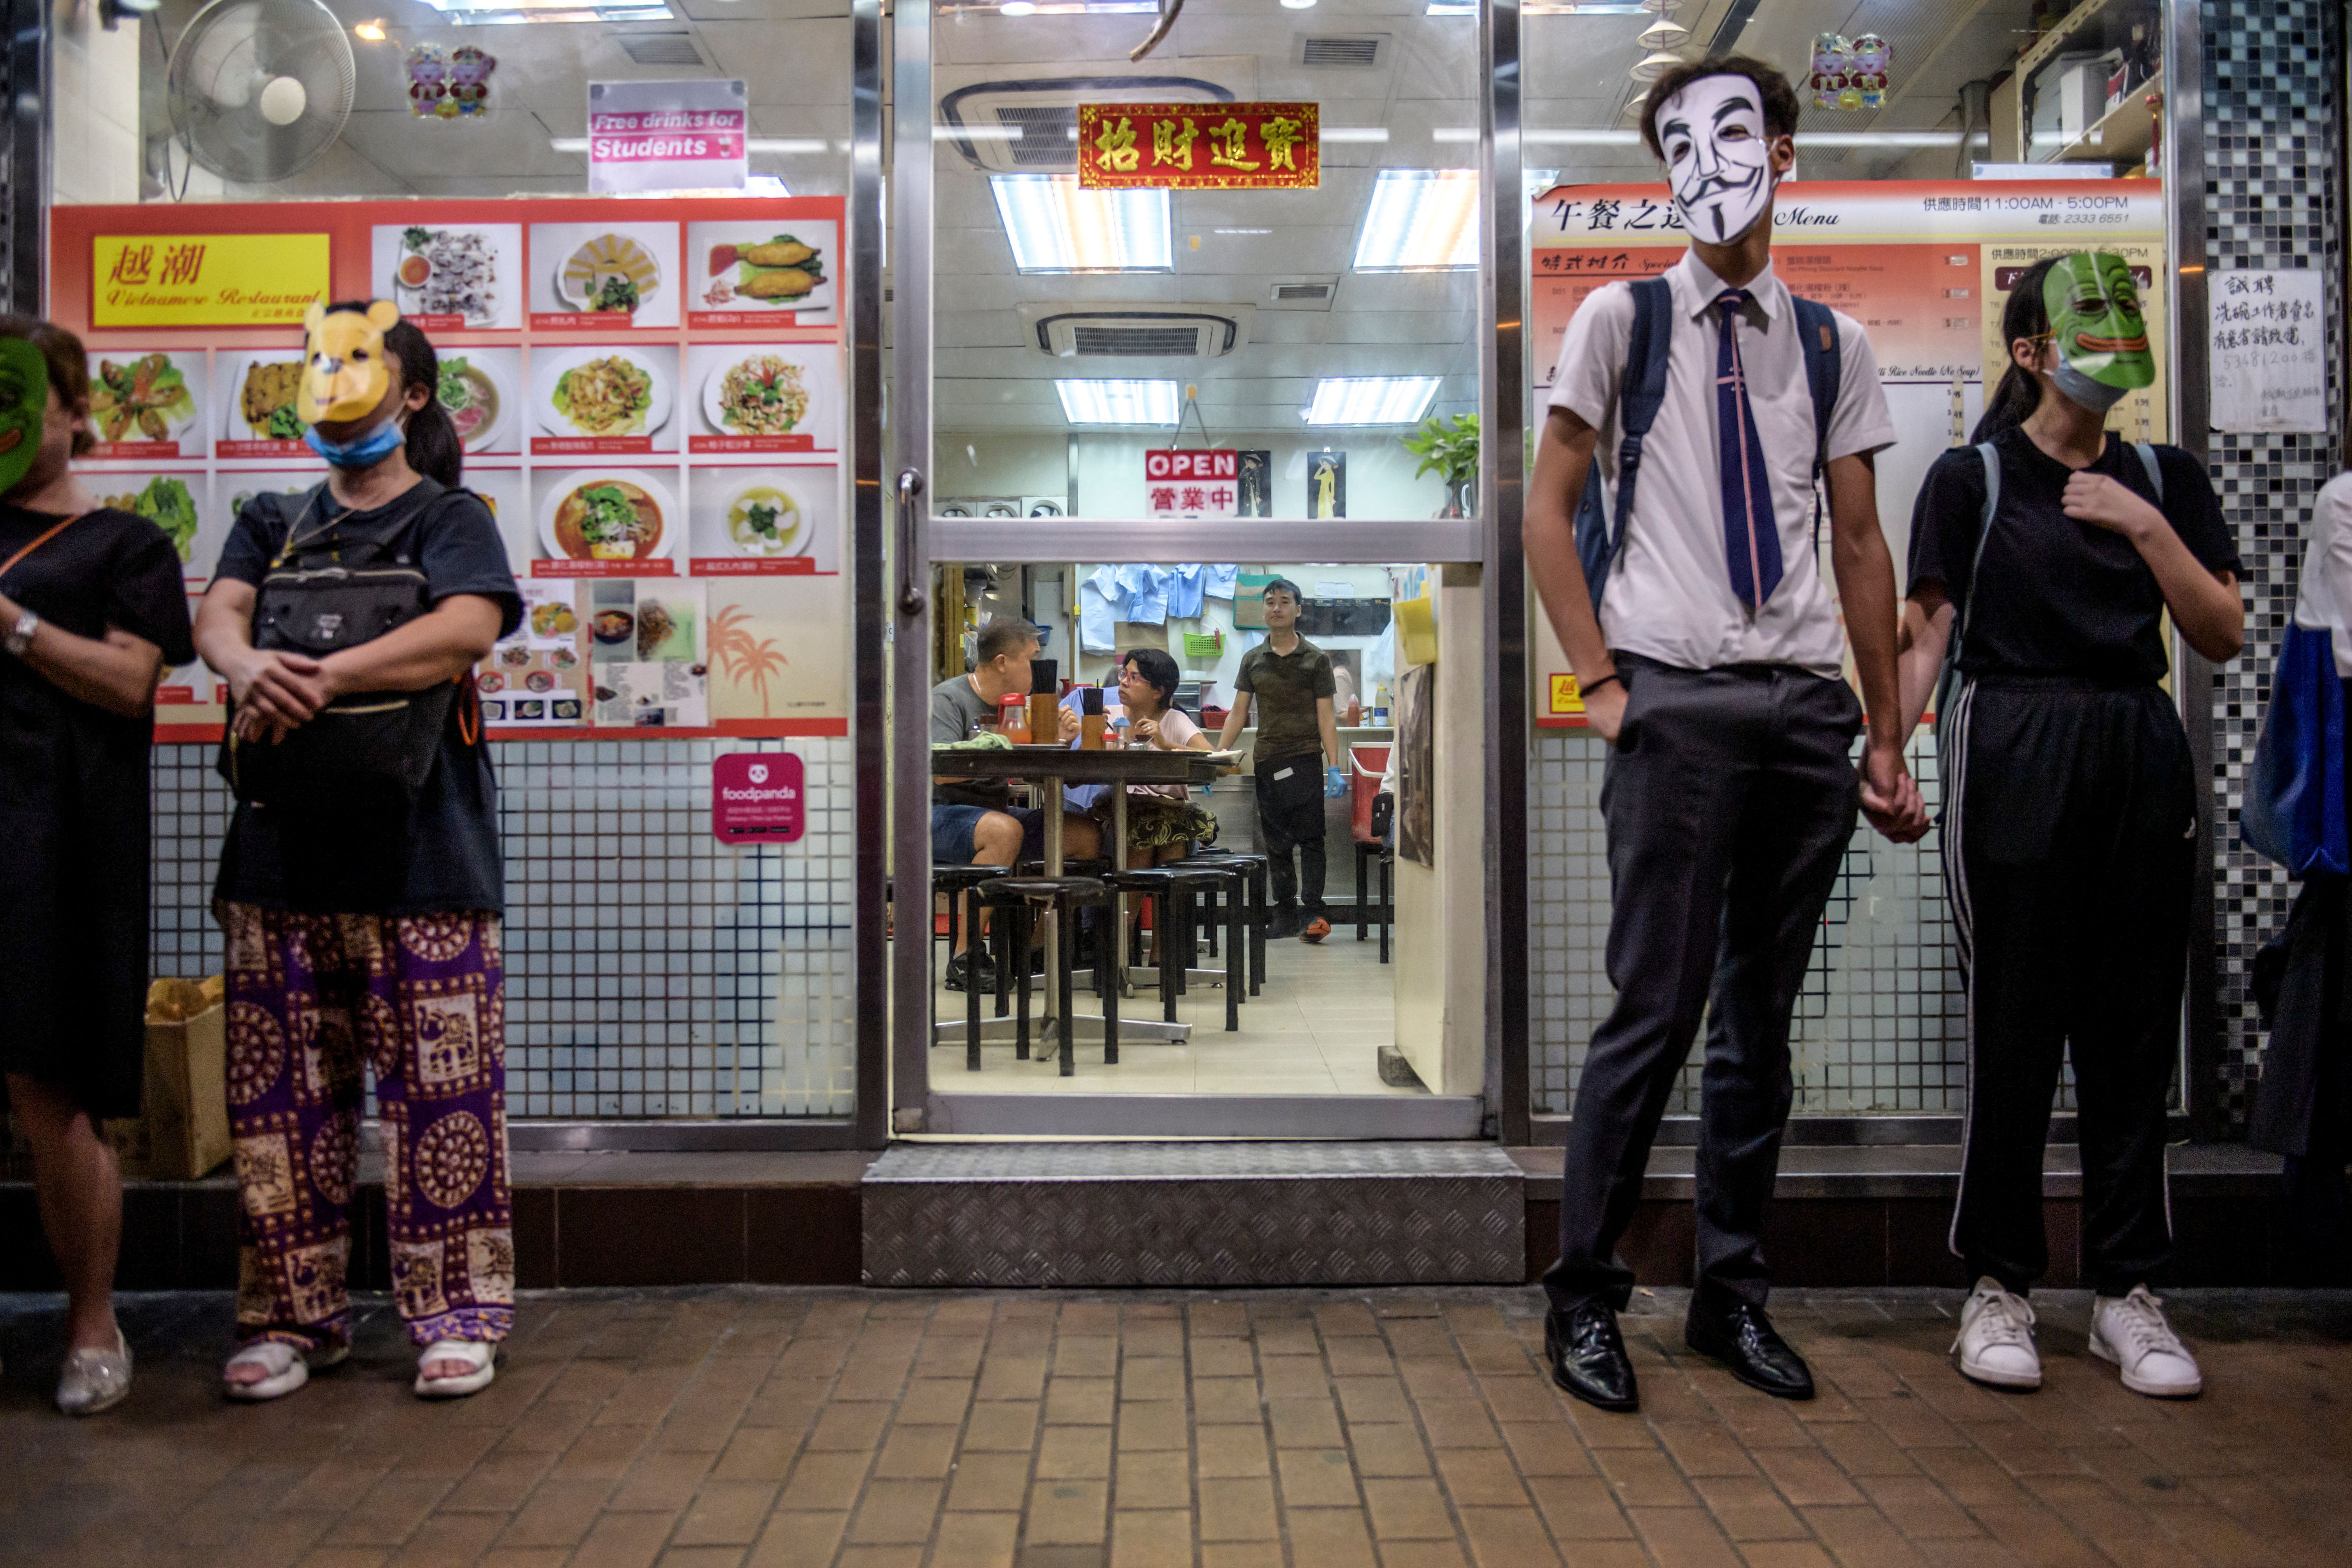 Masked protesters stand outside a restaurant